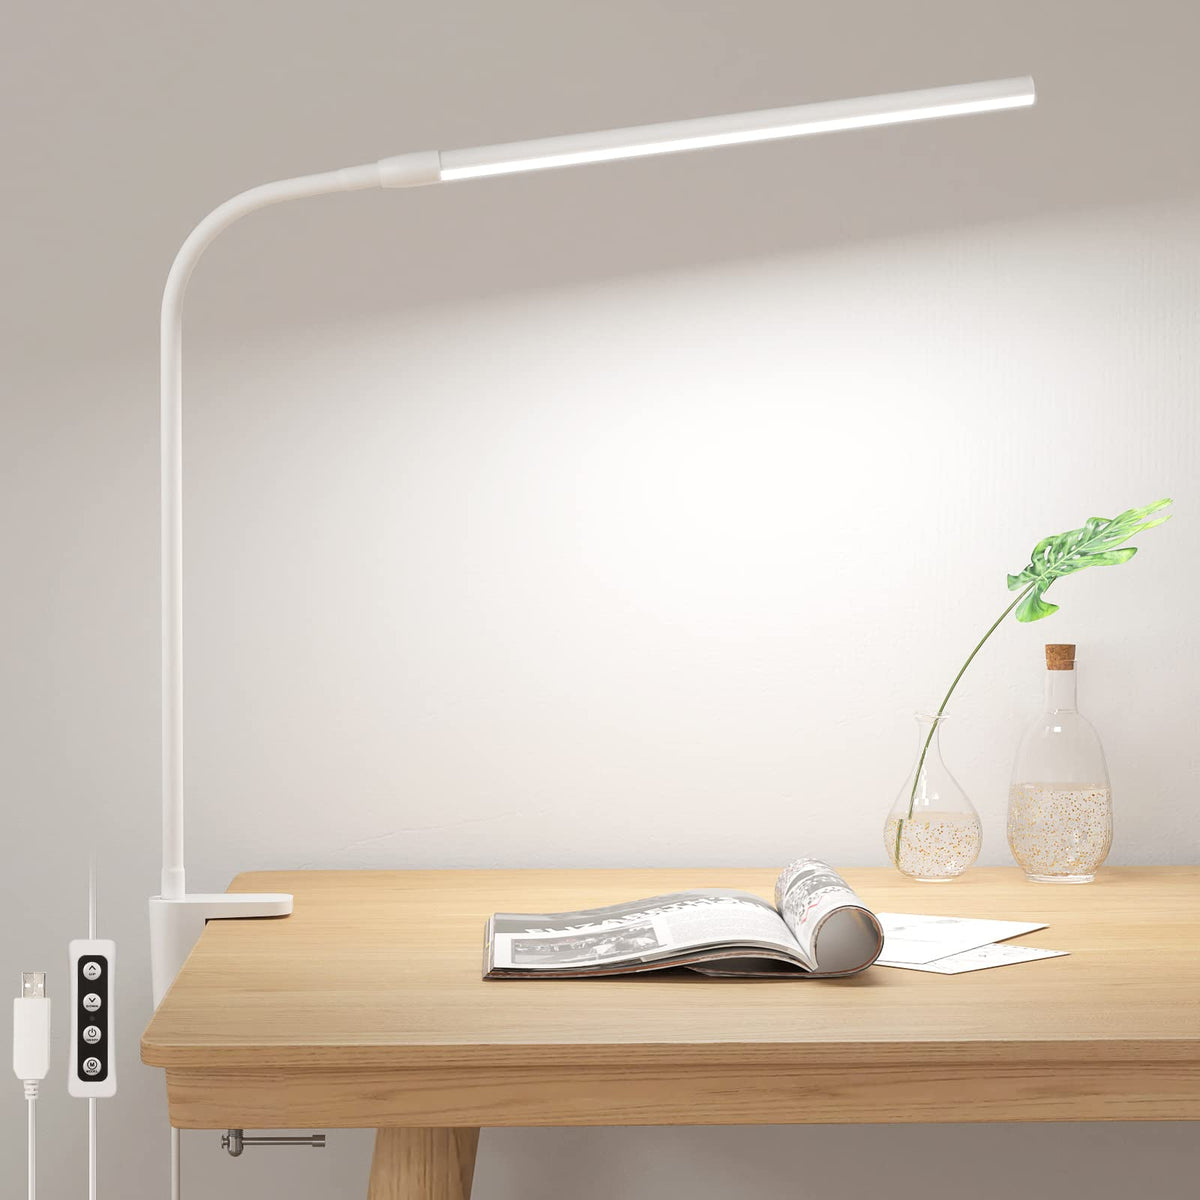 Lepro Desk Lamp with Clamp, LED Reading Lamp with 3 Color Modes 10 Brightness, Dimmable USB Clip on Desk Light with Gooseneck Swing Arm for Bed Headboard, Workbench, Home Office and Nail (White)